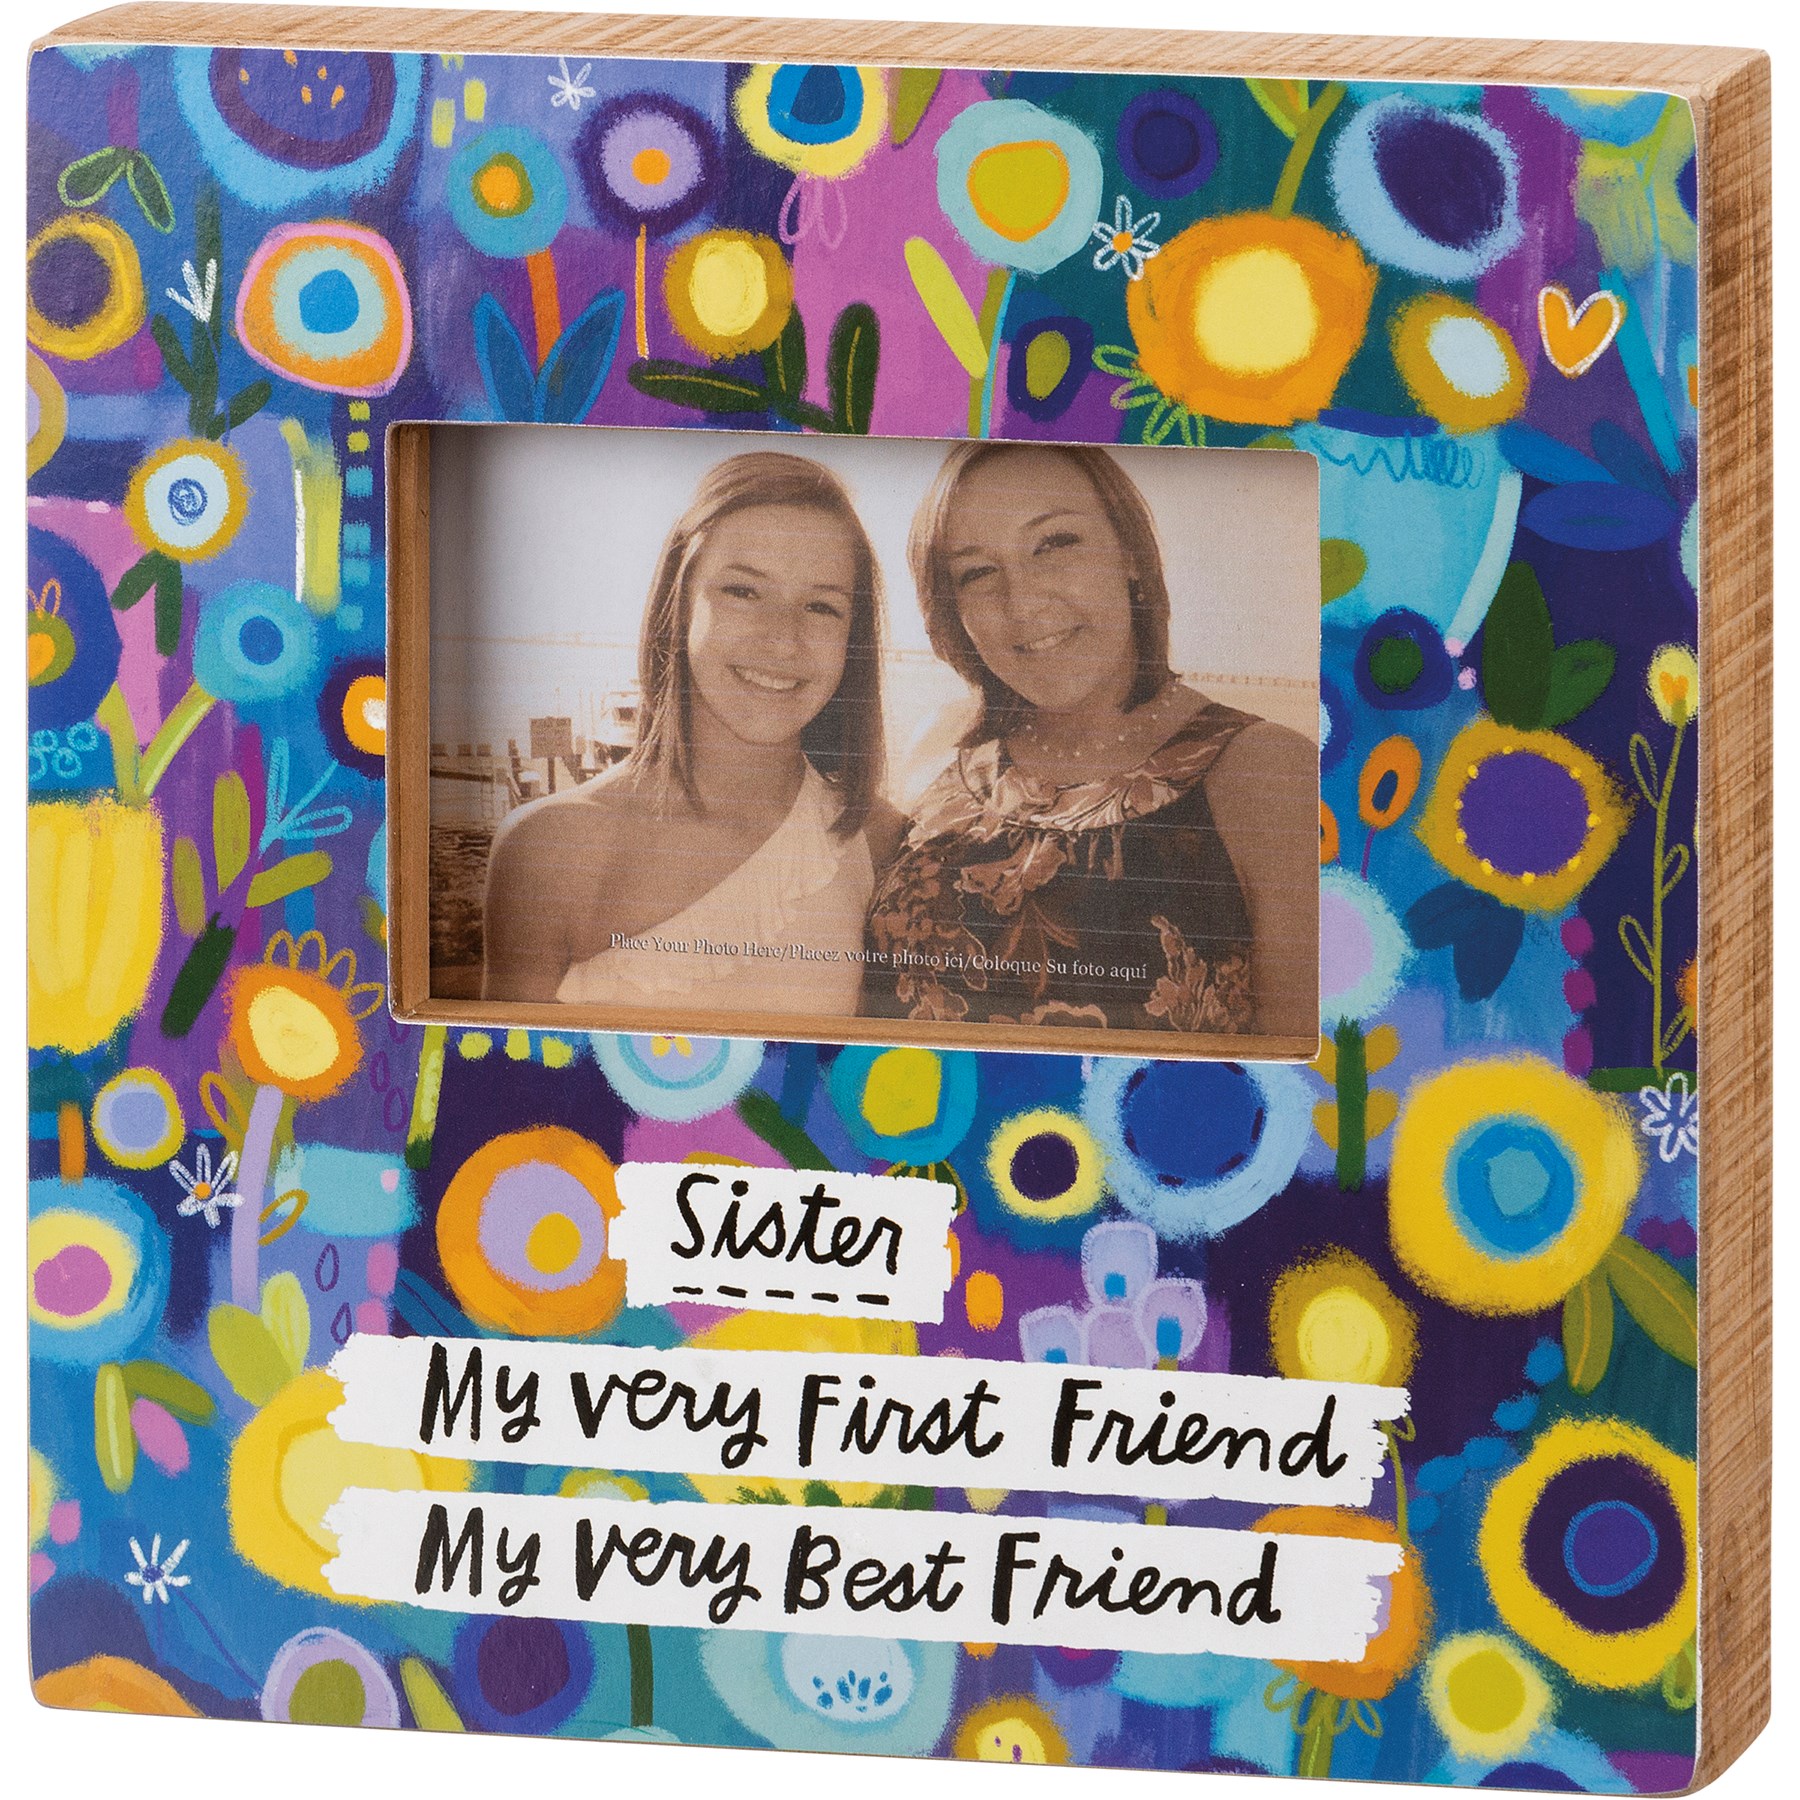 Soul Sisters 10 x 10 Primitives by Kathy Inset Box Frame Clip Photo Holder